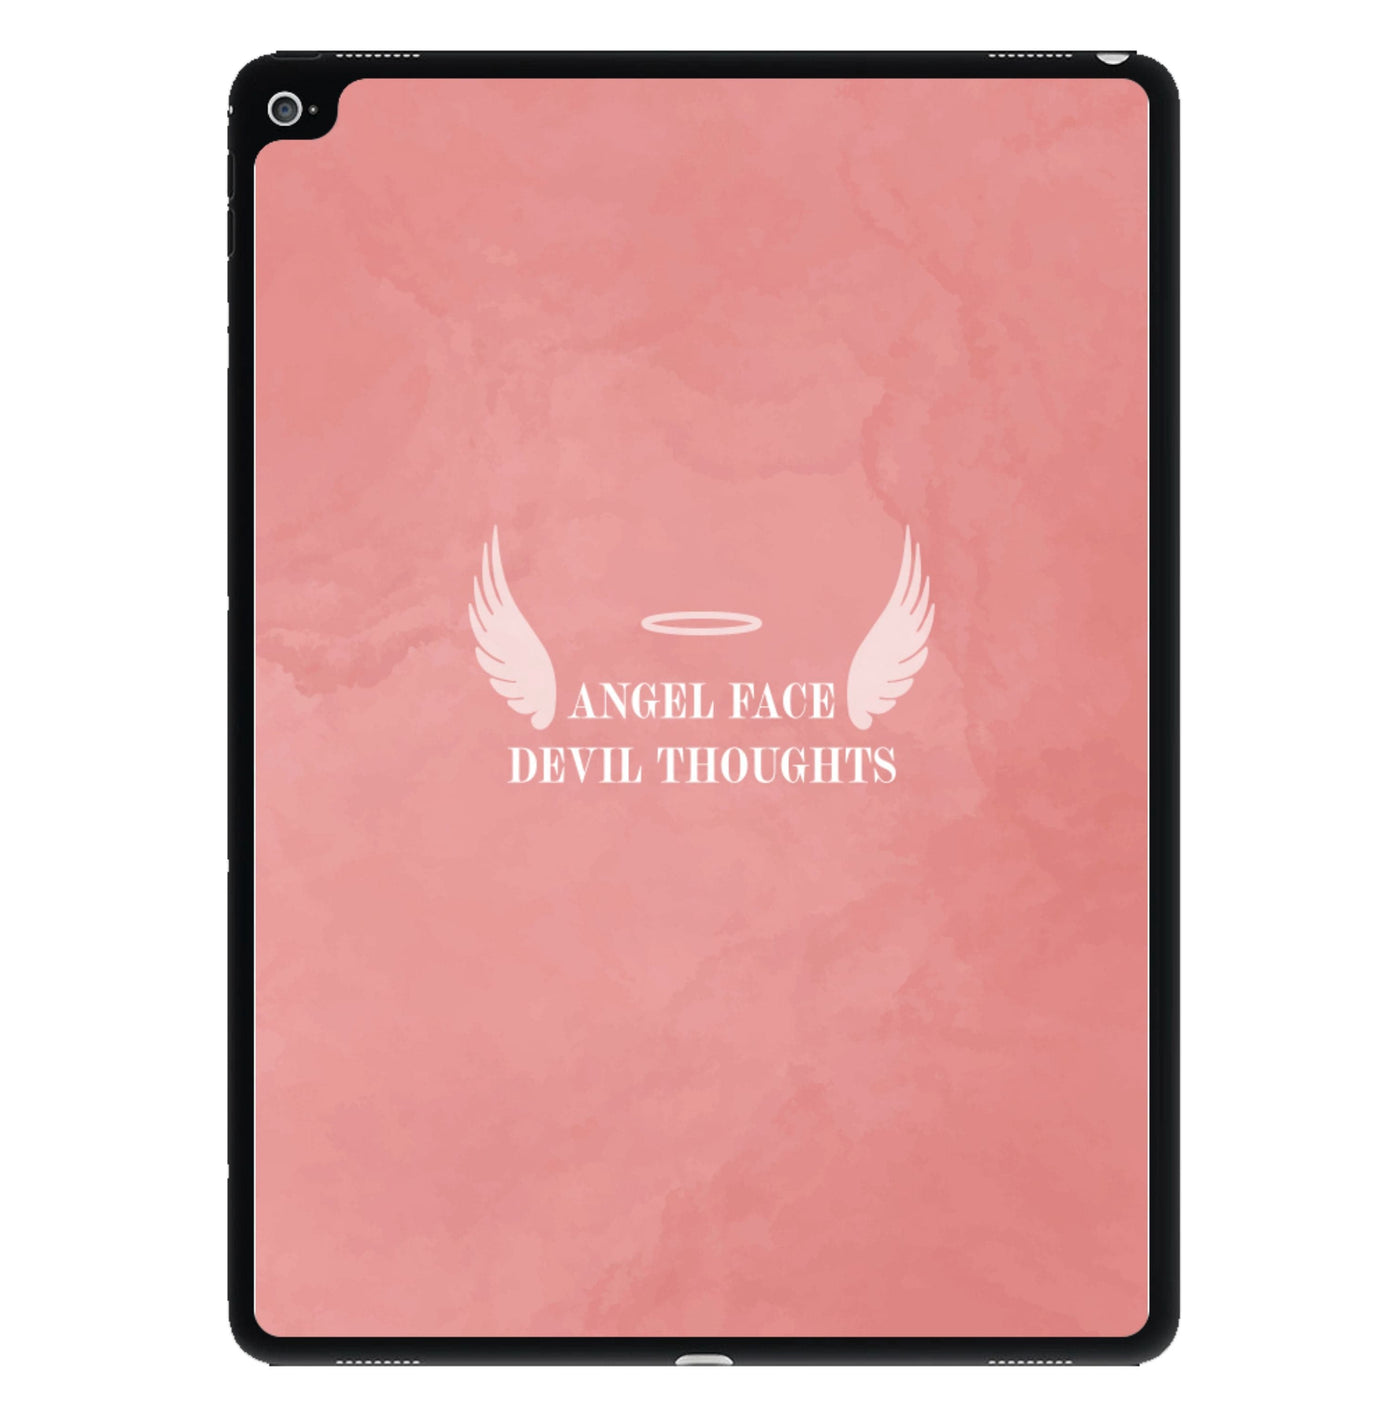 Angel Face Devil Thoughts iPad Case